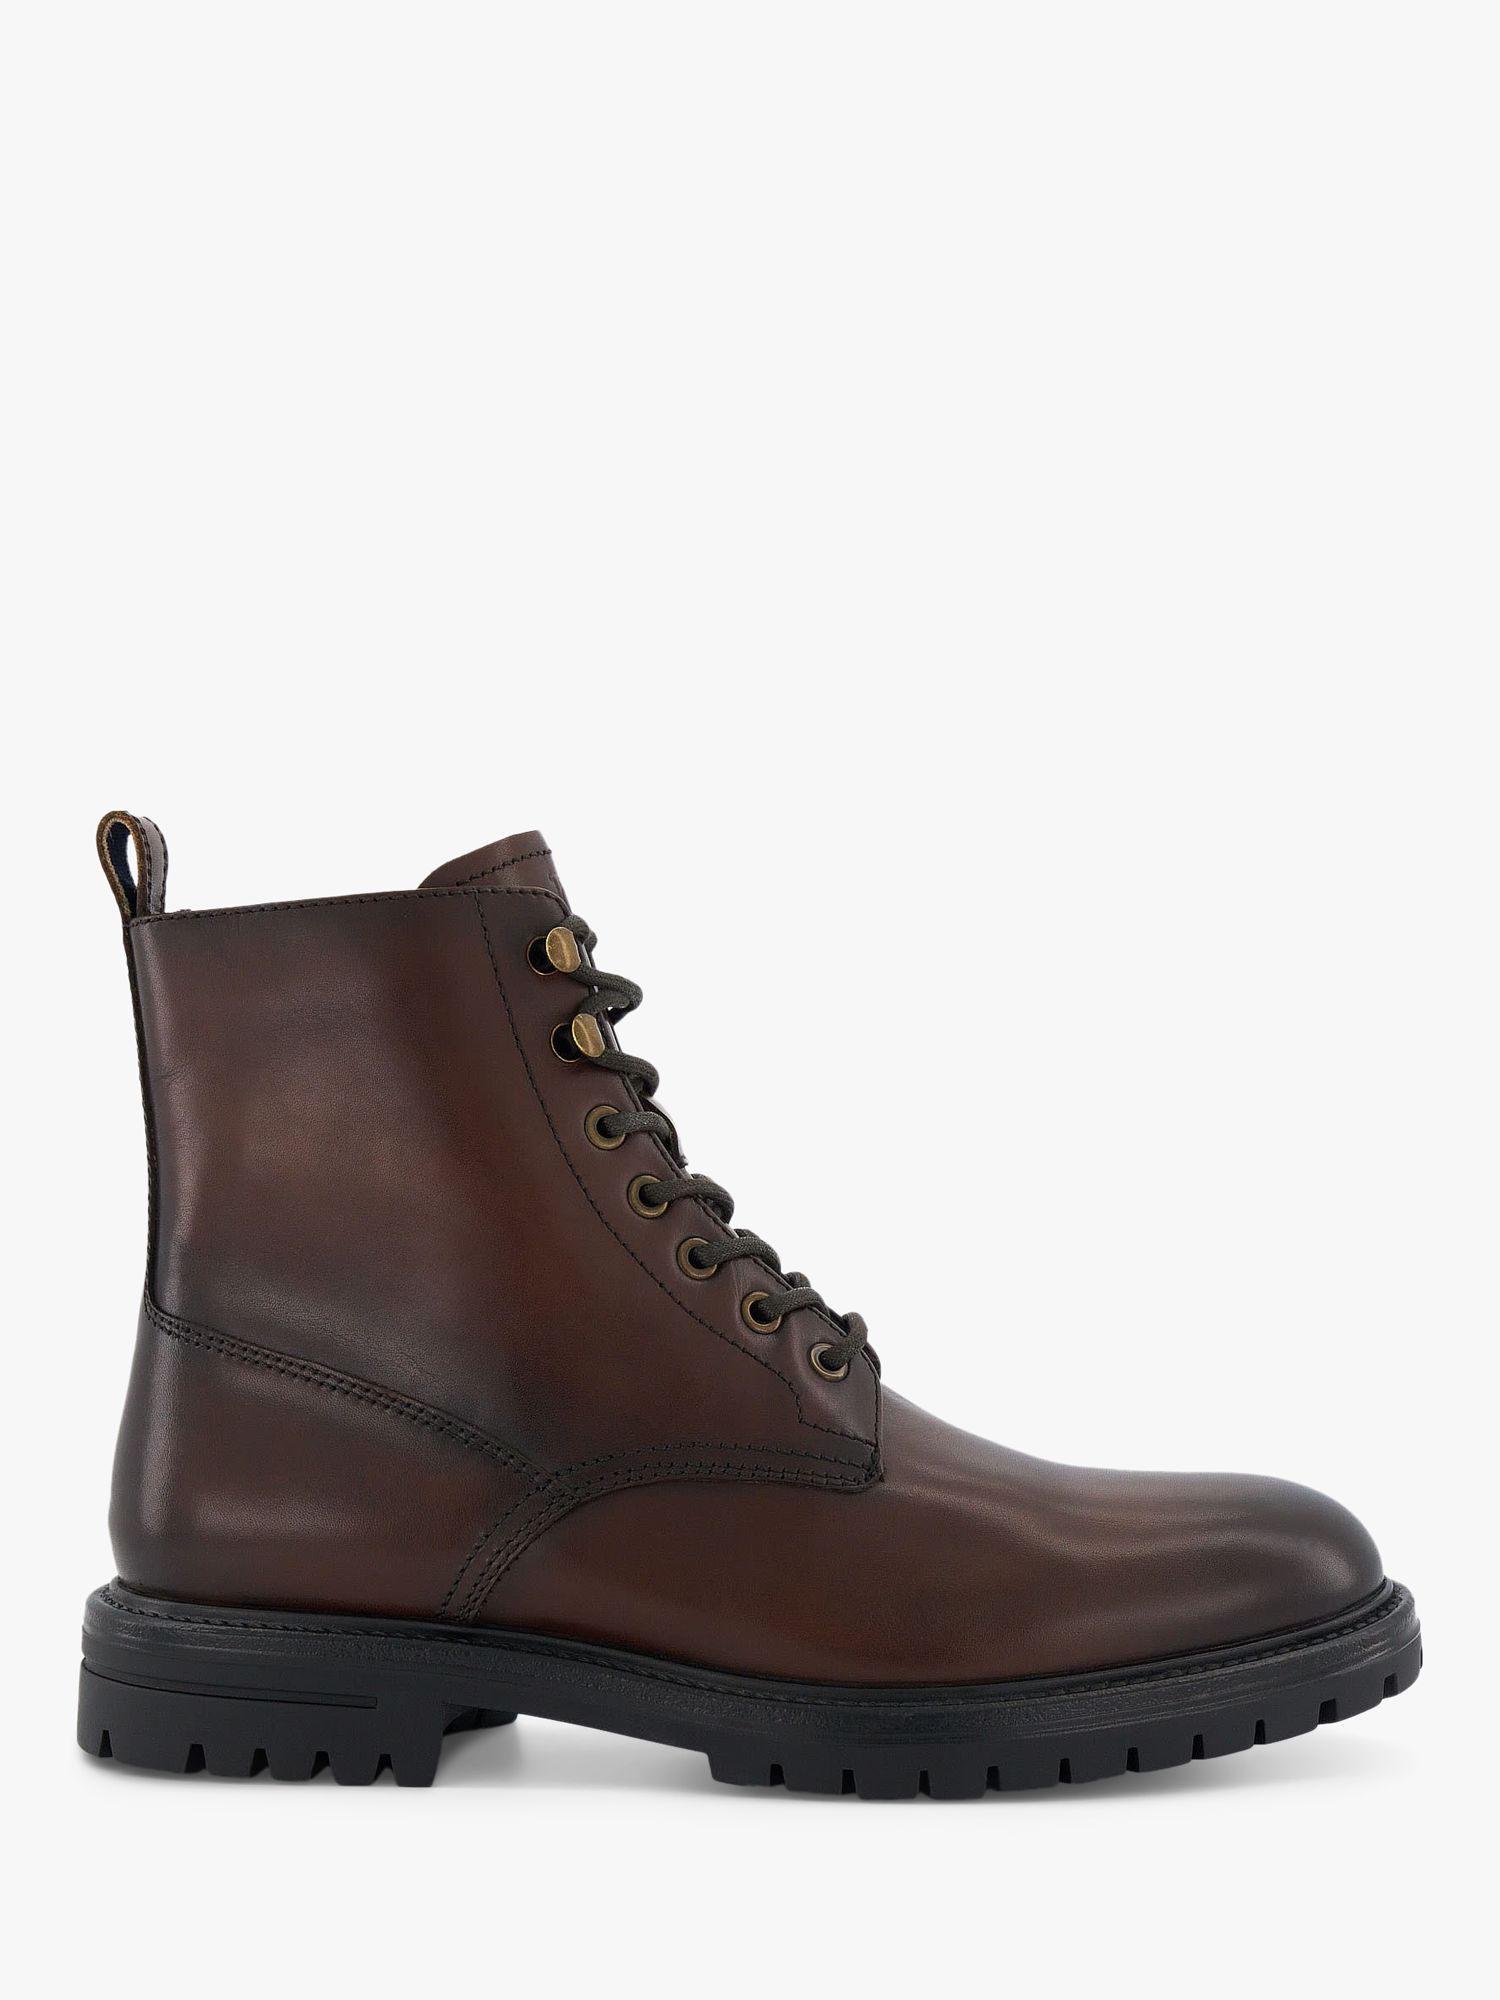 Dune Concepts Leather Lace Up Boots, Brown at John Lewis & Partners